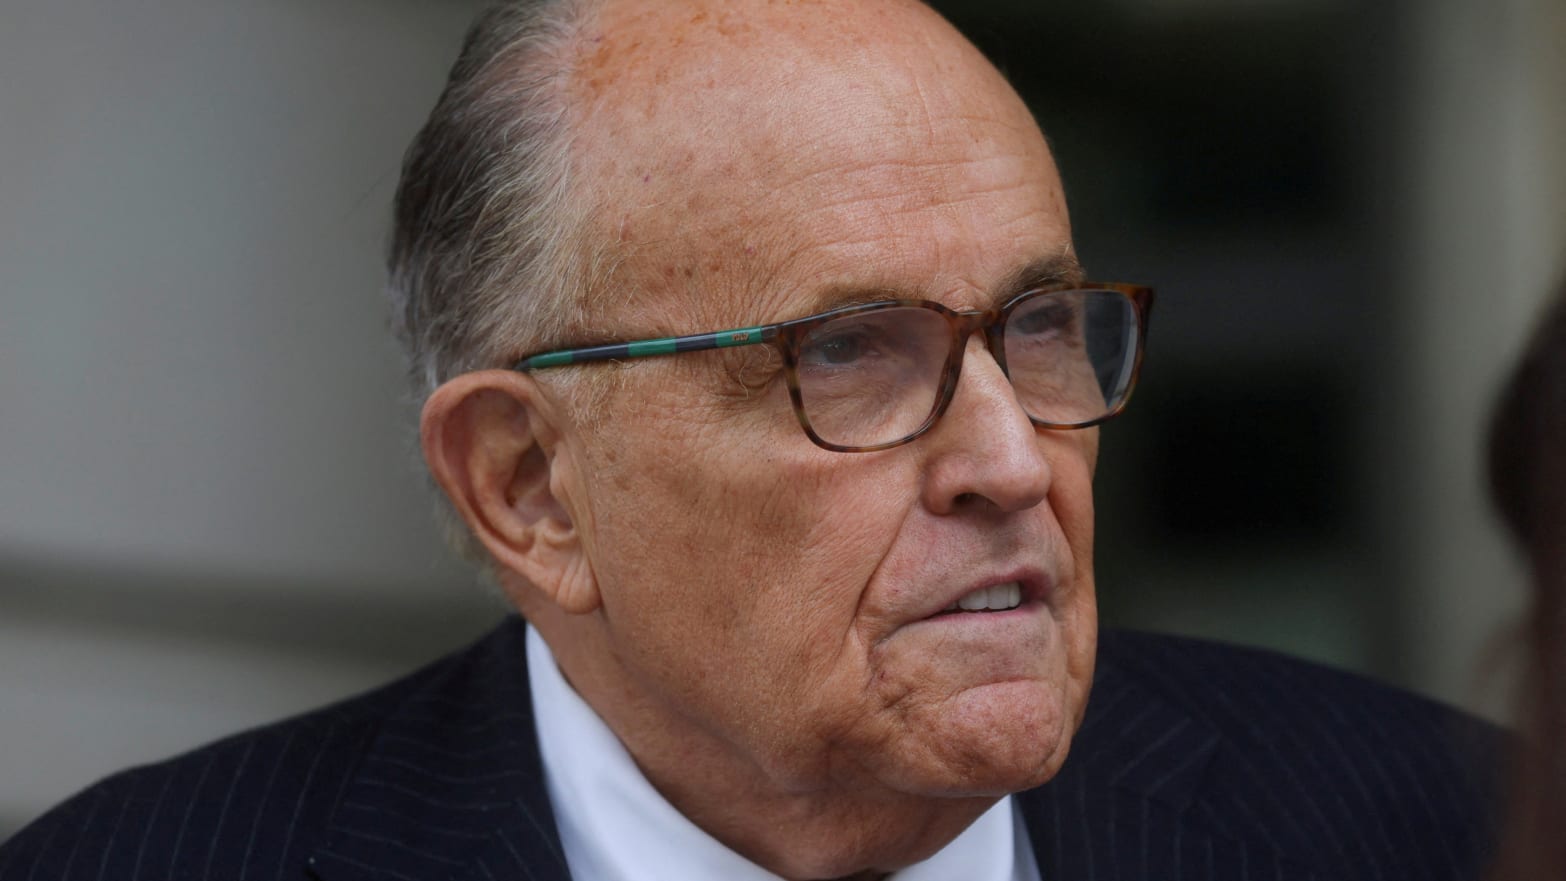 A picture of Former New York City Mayor Rudy Giuliani, who has been accused of sexual harassment and rape by Noelle Dunphy in a $10 million lawsuit. New transcripts reveal conversations in which Giuliani made lewd comments toward Dunphy.